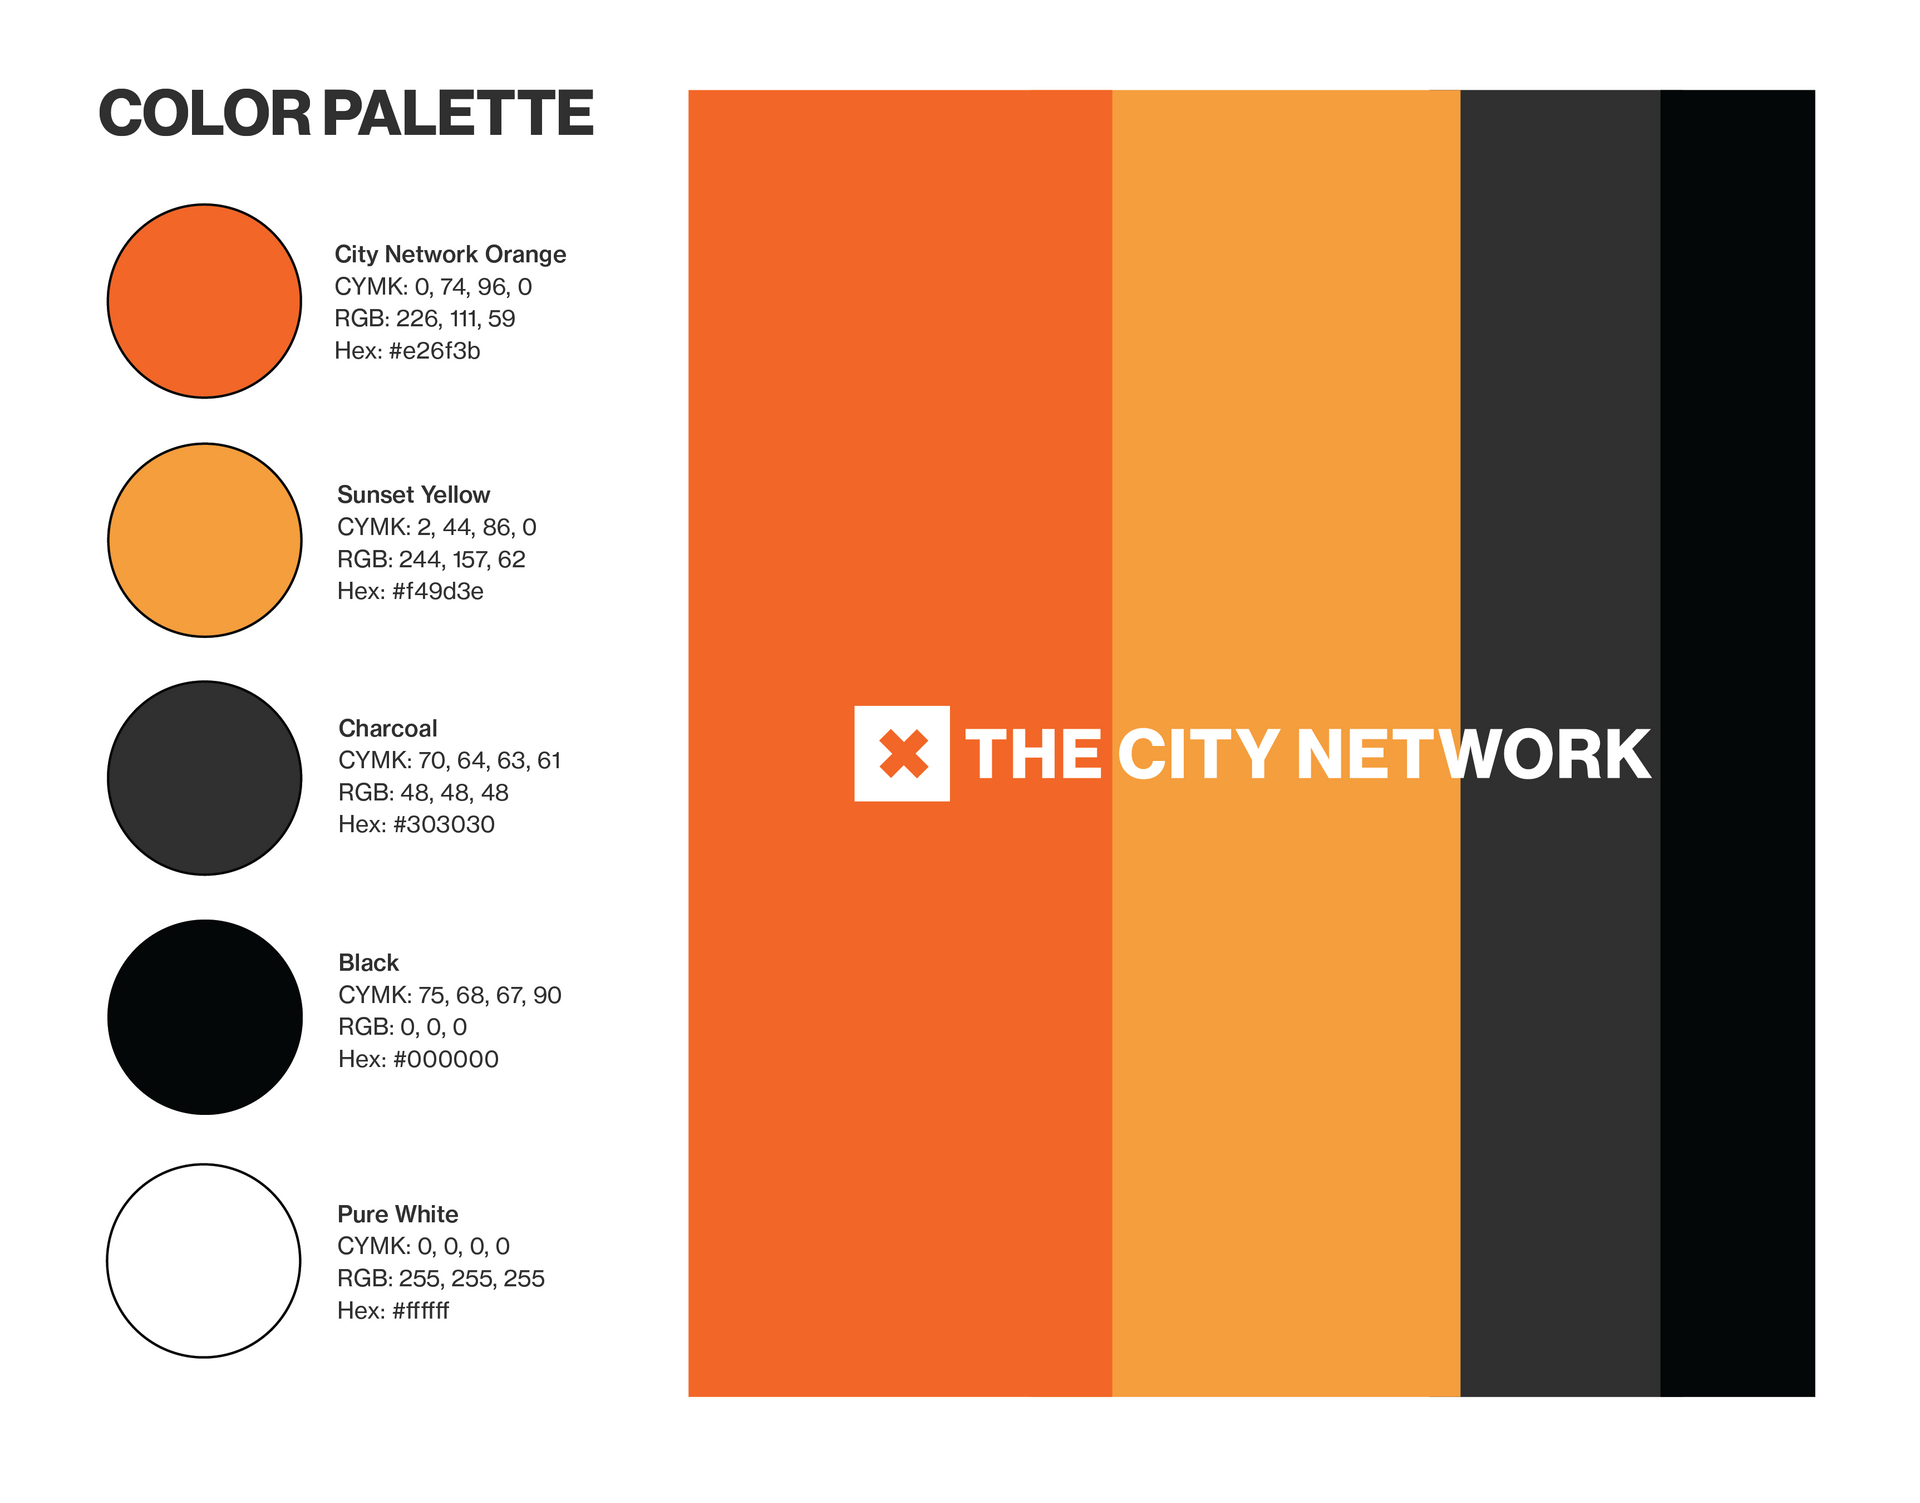 A color palette for the city network is shown.